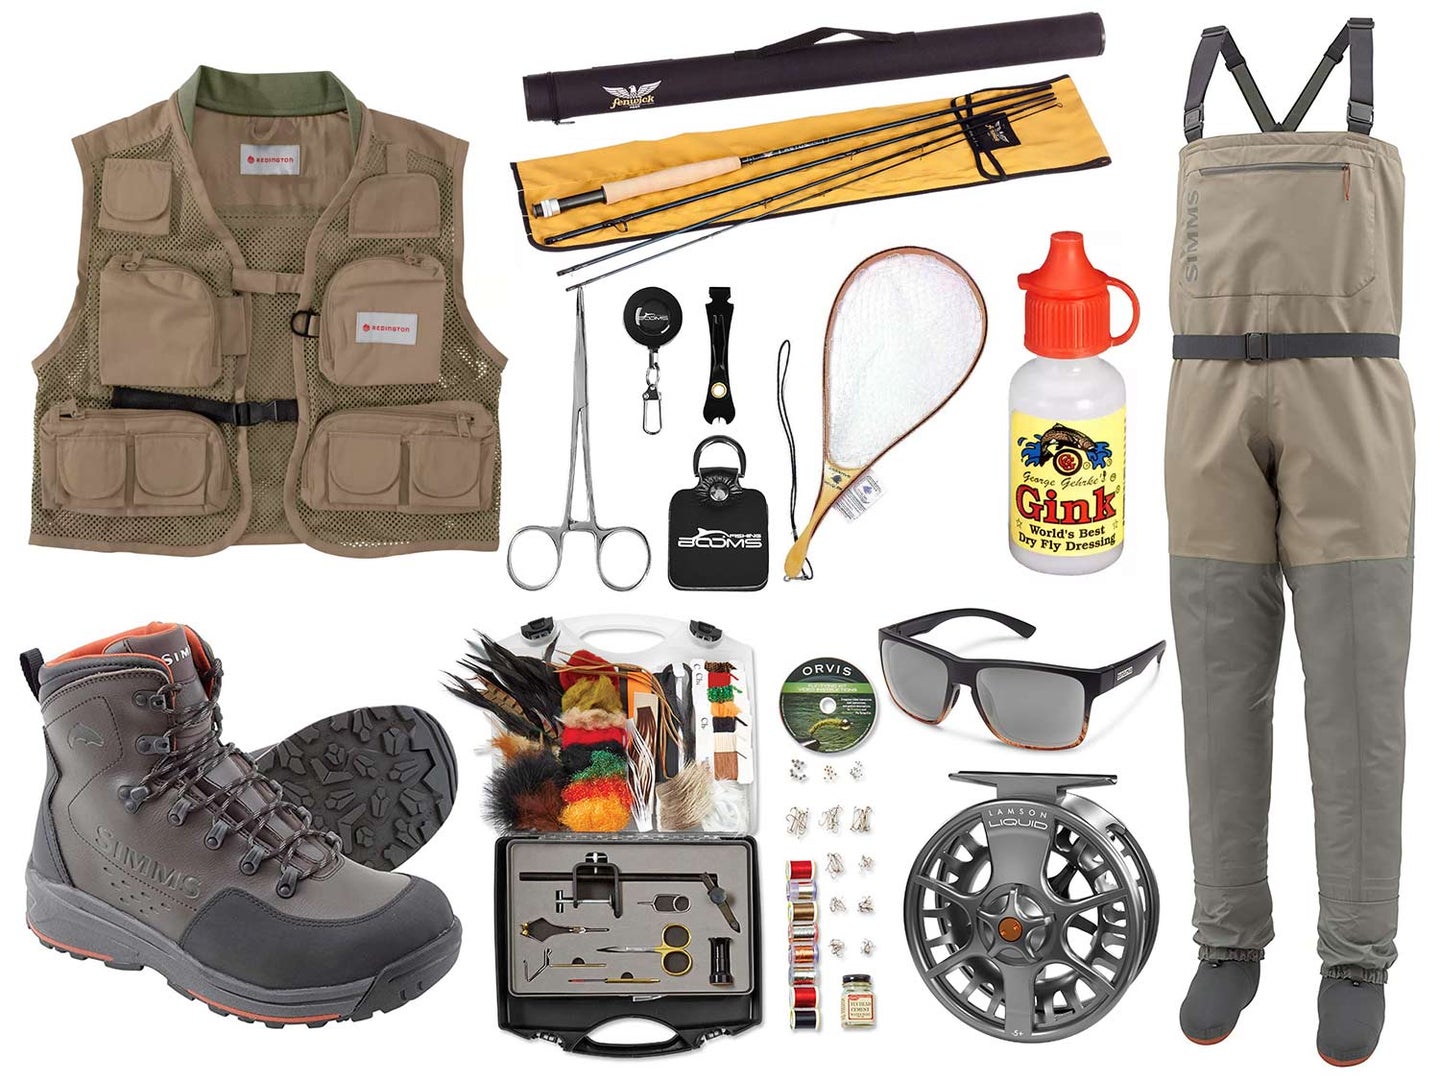 What Is The Best Fly Fishing Pack For You? (Fly Fishing Gear